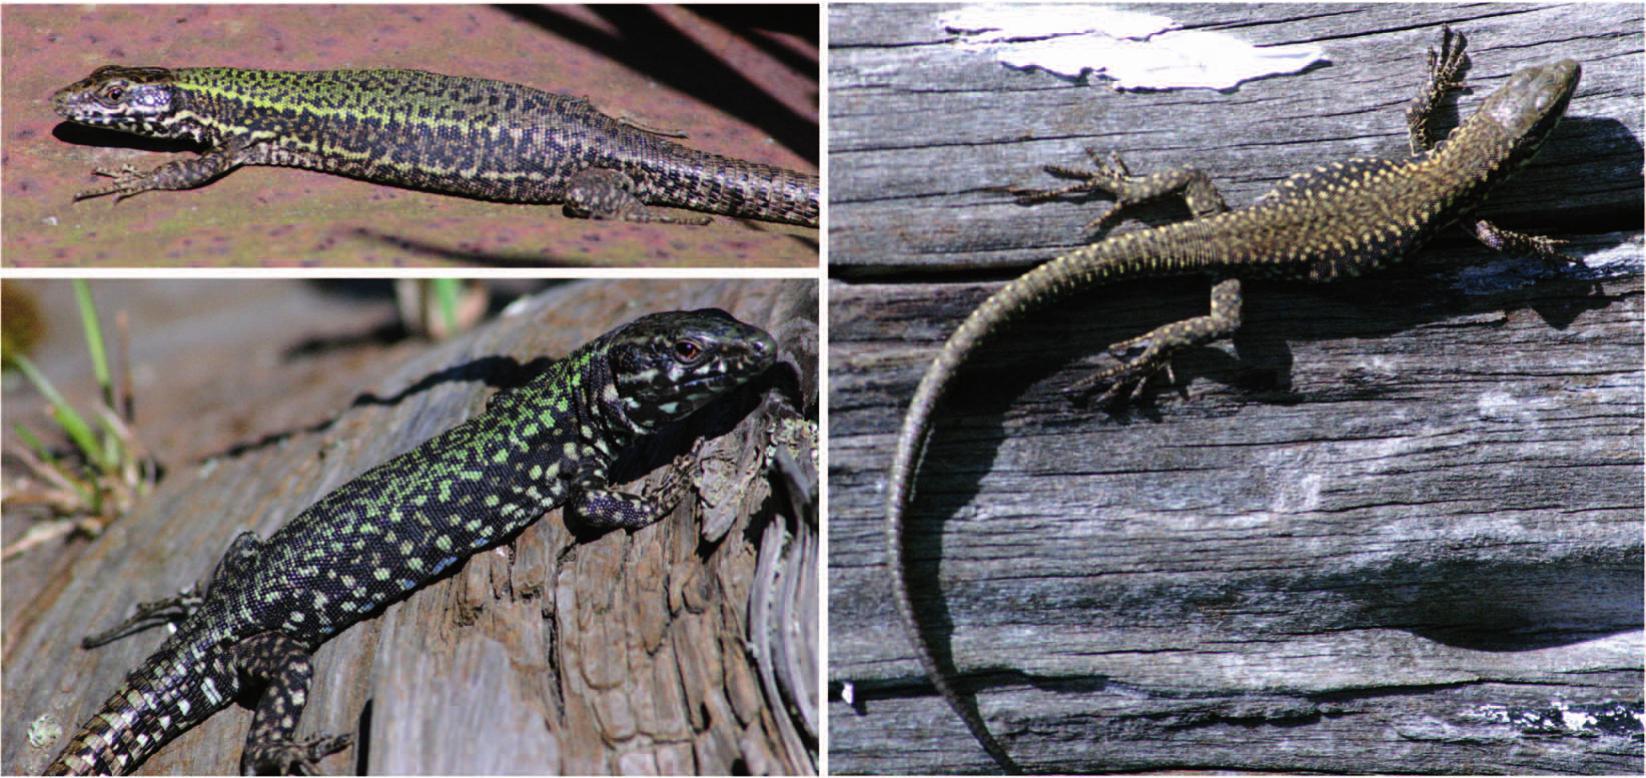 The wall lizard invasion of Vancouver Island 